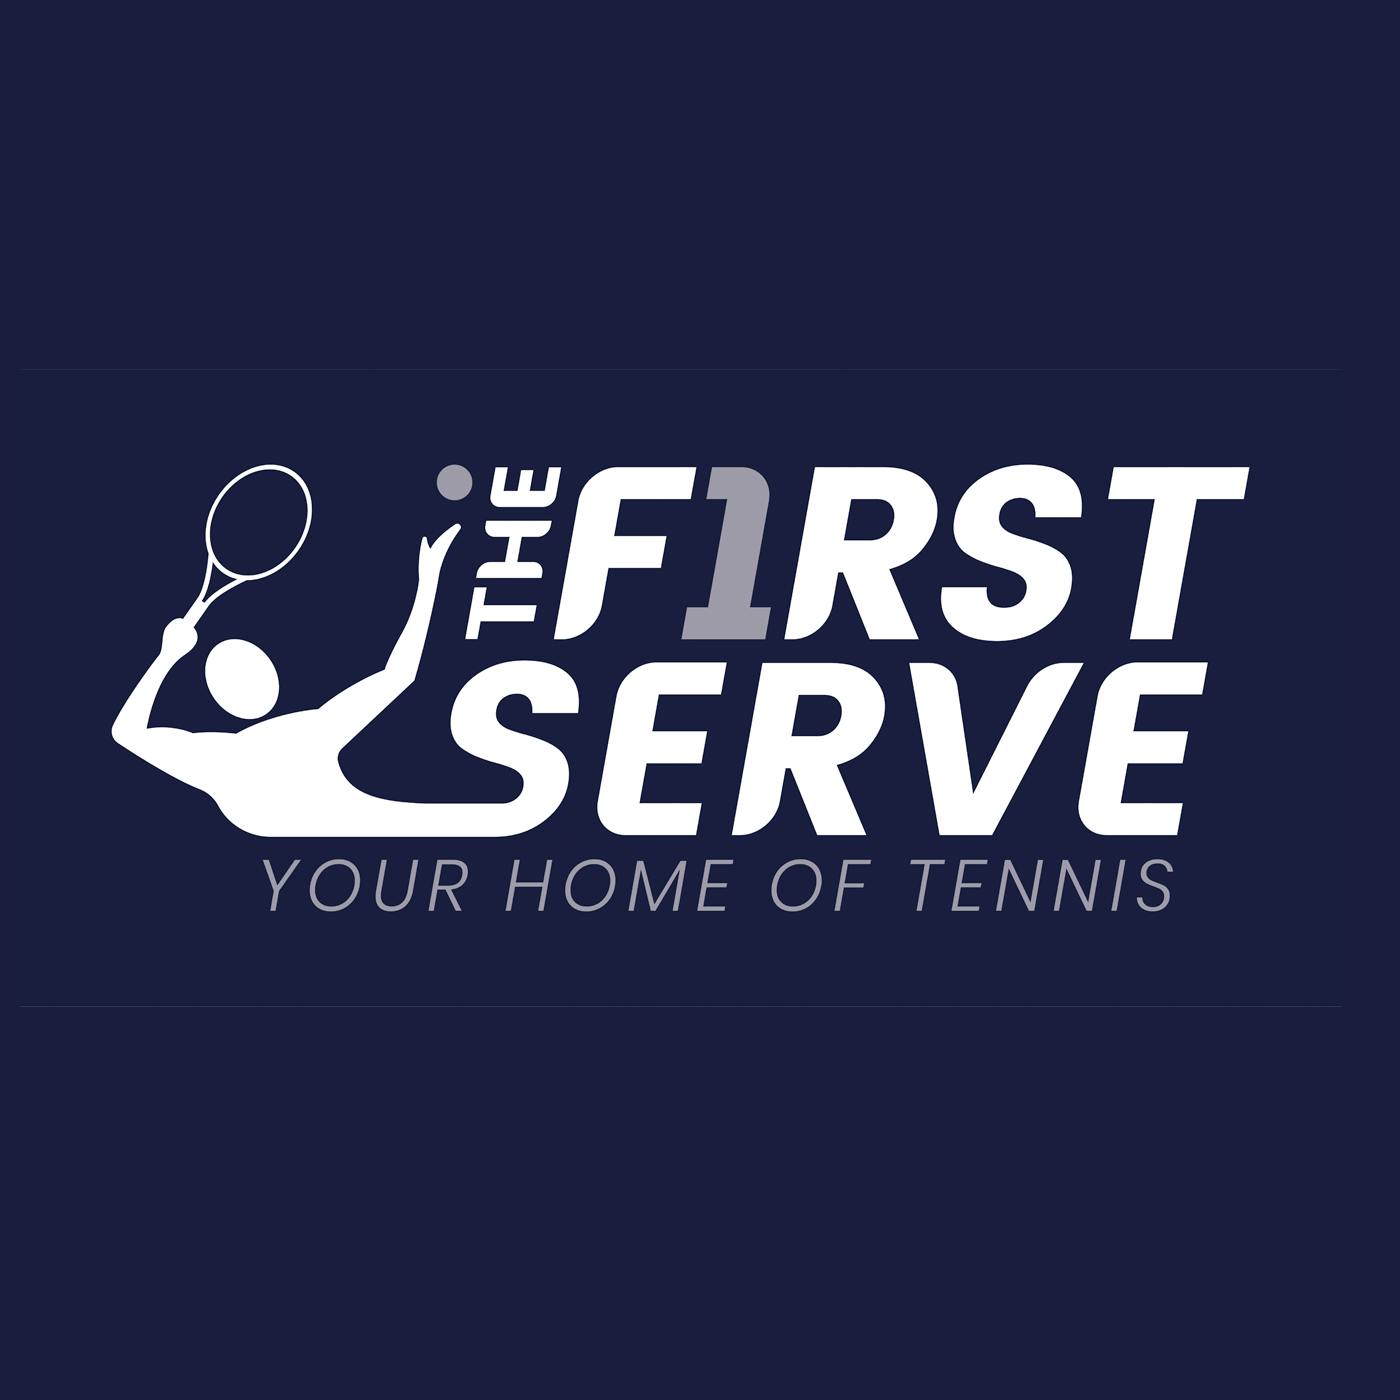 2022 E37: Tour Wrap, Game on Recycling, One Padel - Melbourne Classic, UTR Regional latest, Omar Jasika